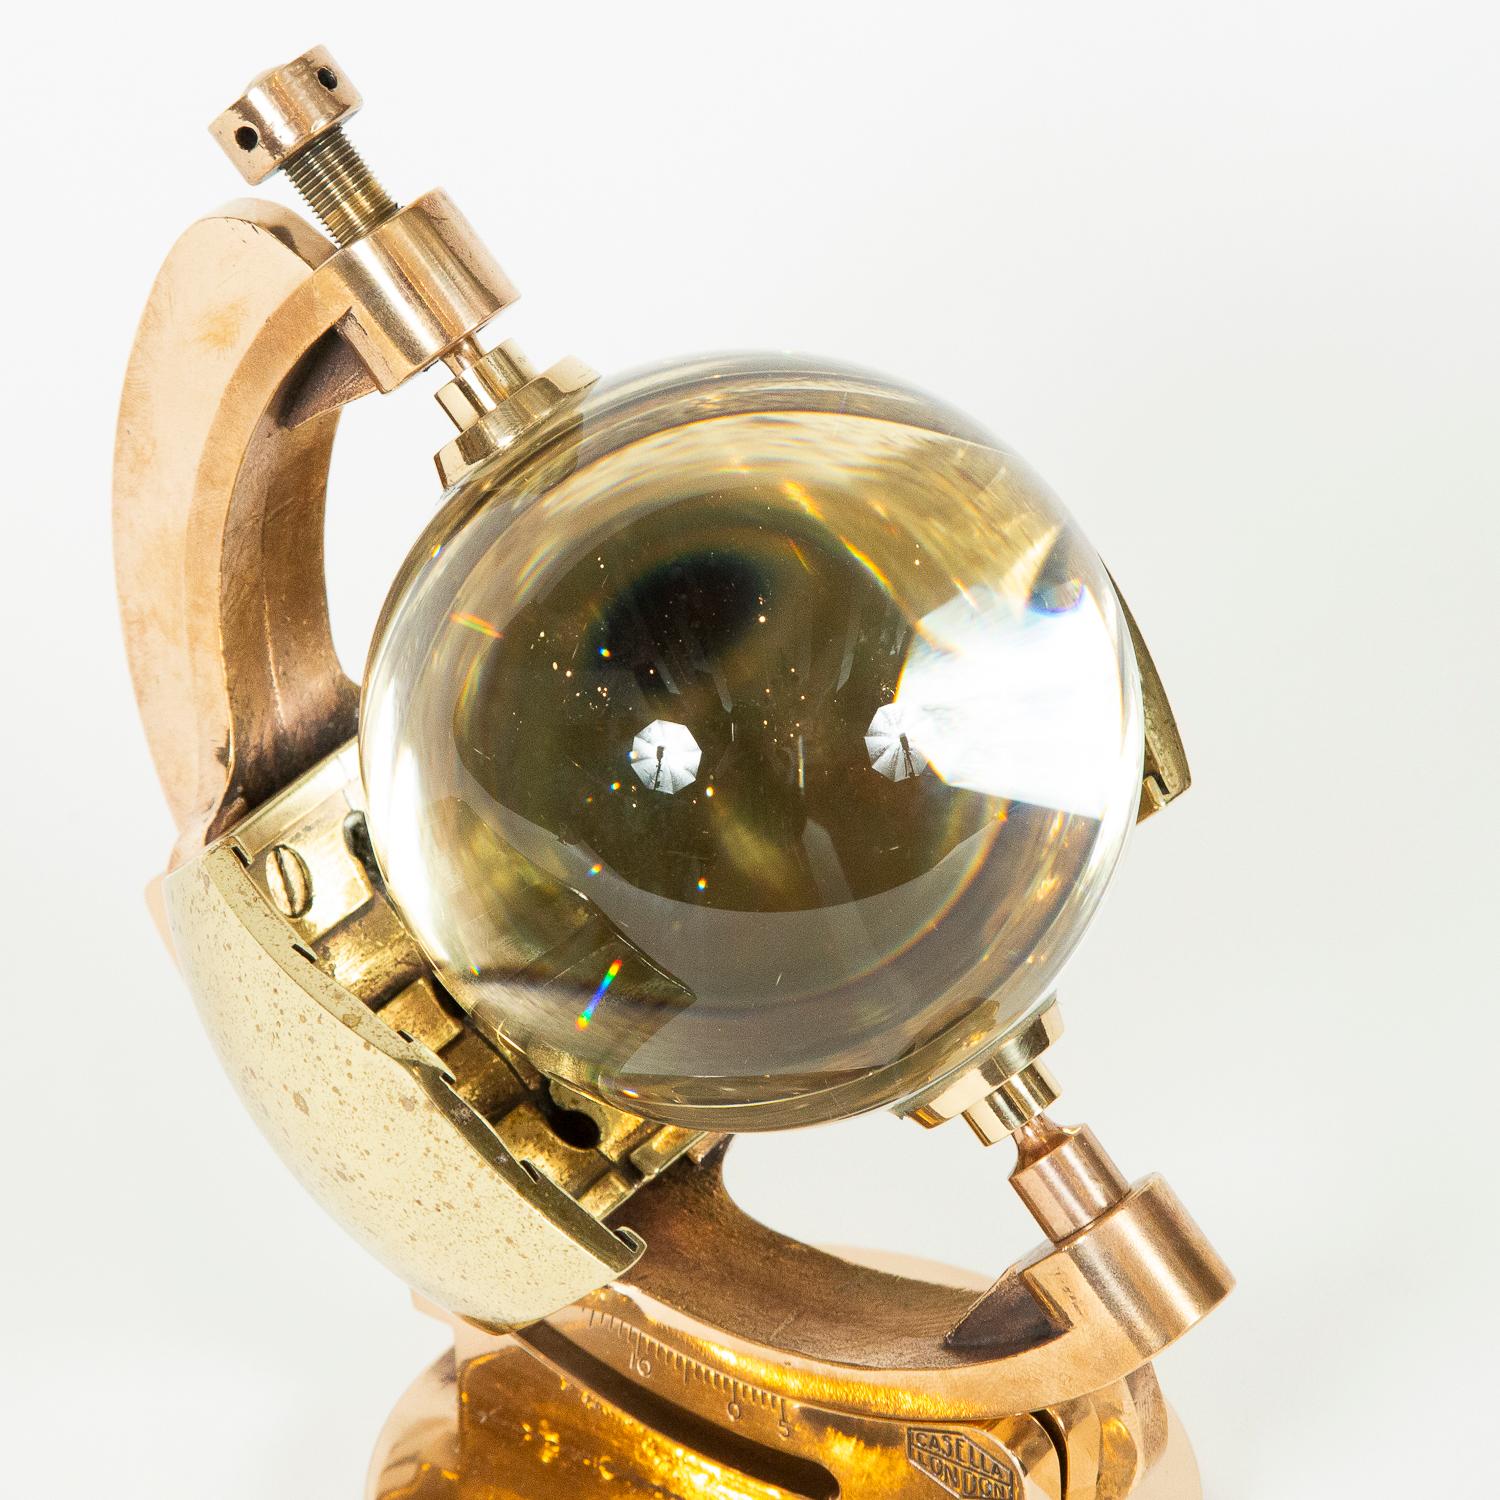 English Campbell–Stokes Sunshine Recorder by Casella of London